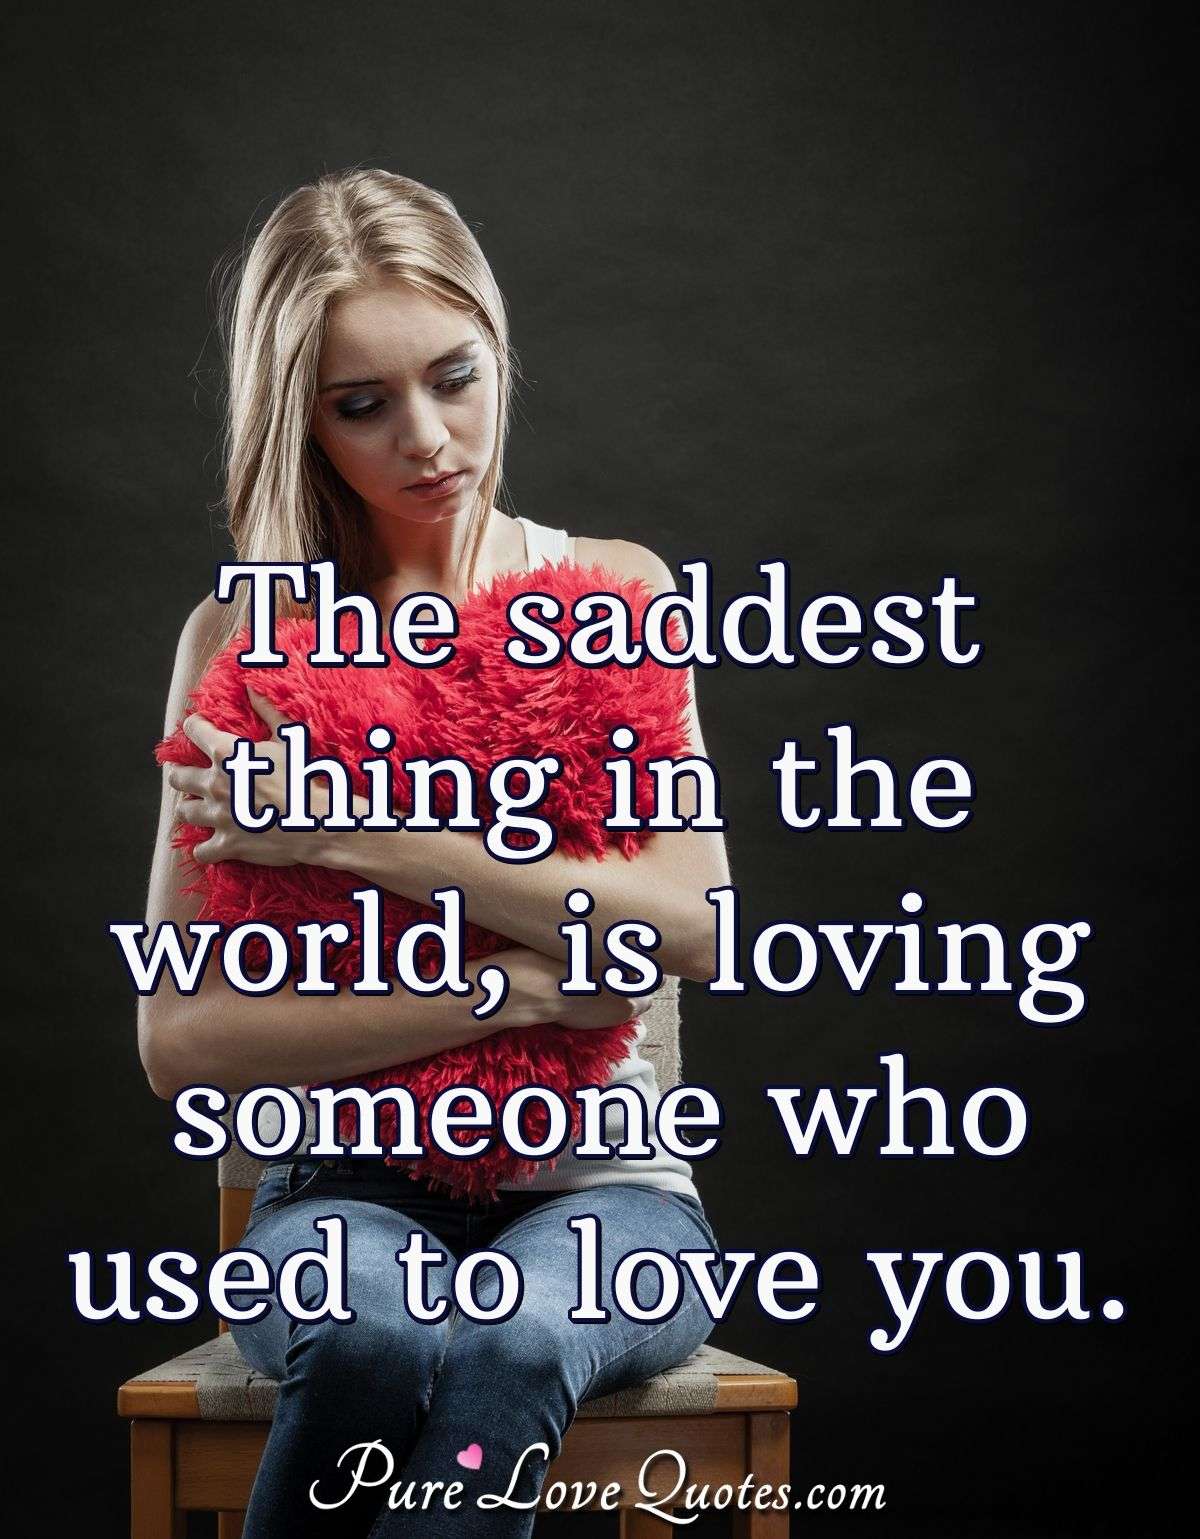 The saddest thing in the world, is loving someone who used to love you. - Anonymous